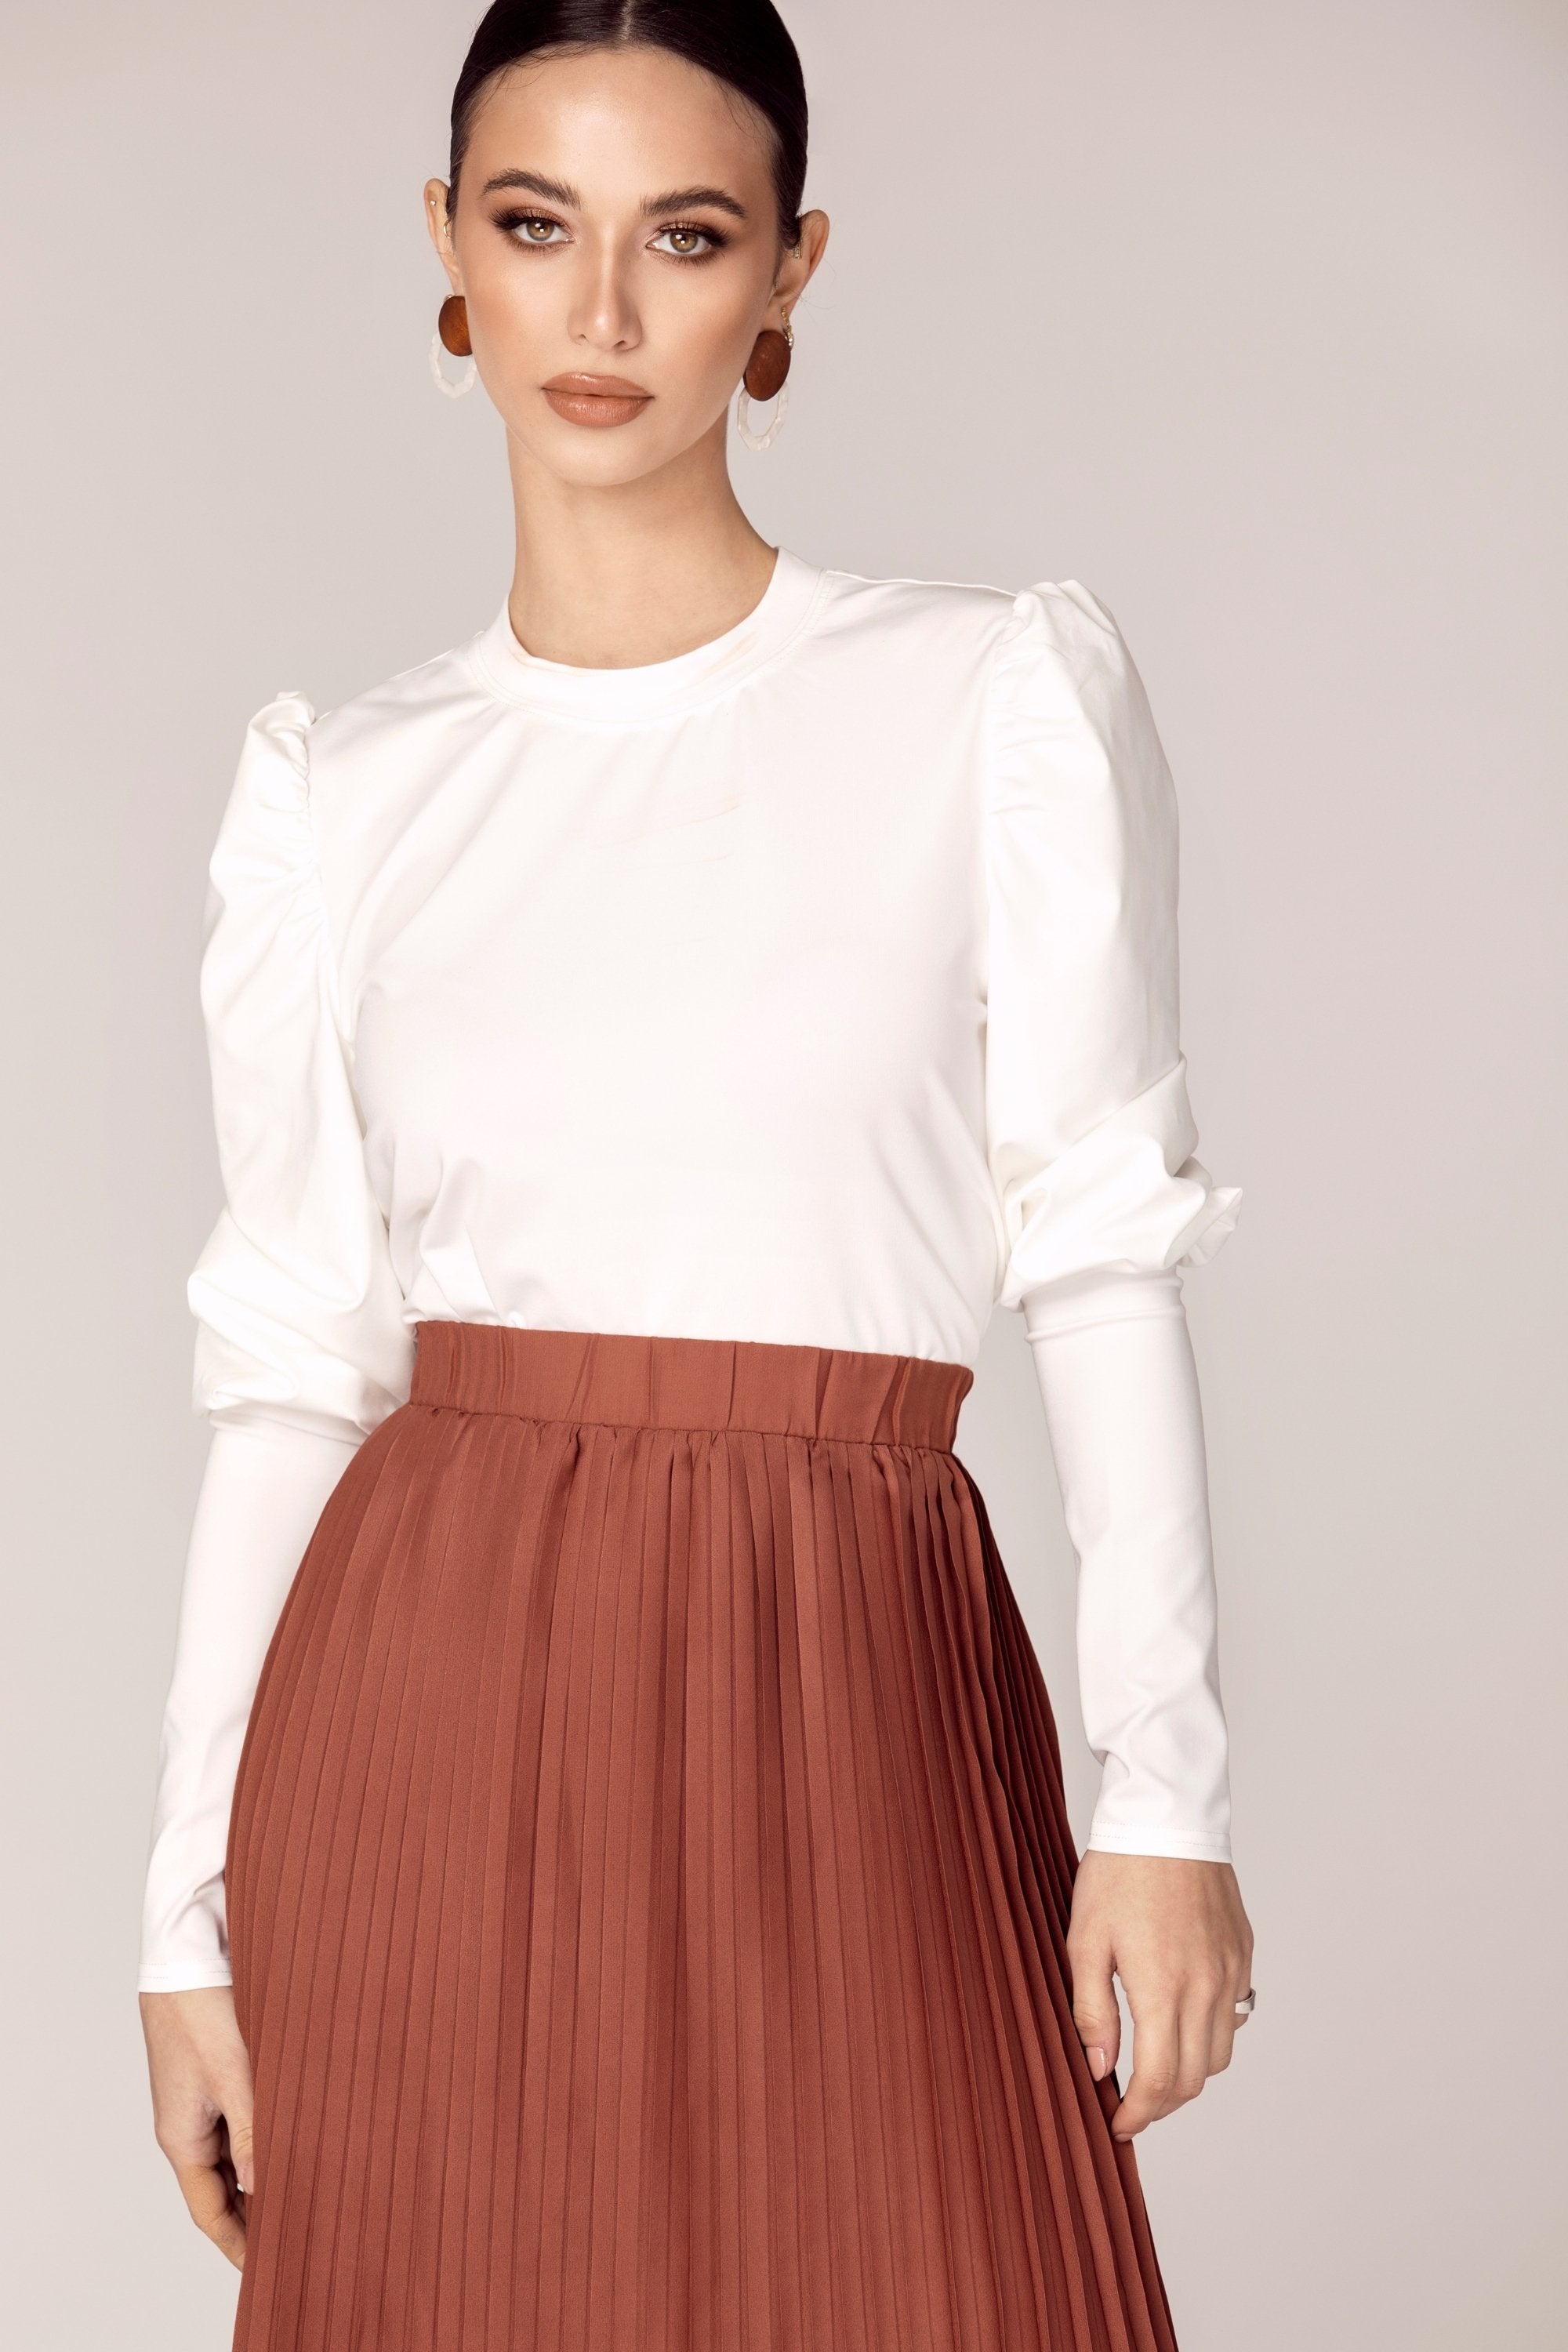 Juliette White Puff Sleeve Top Veiled Collection 